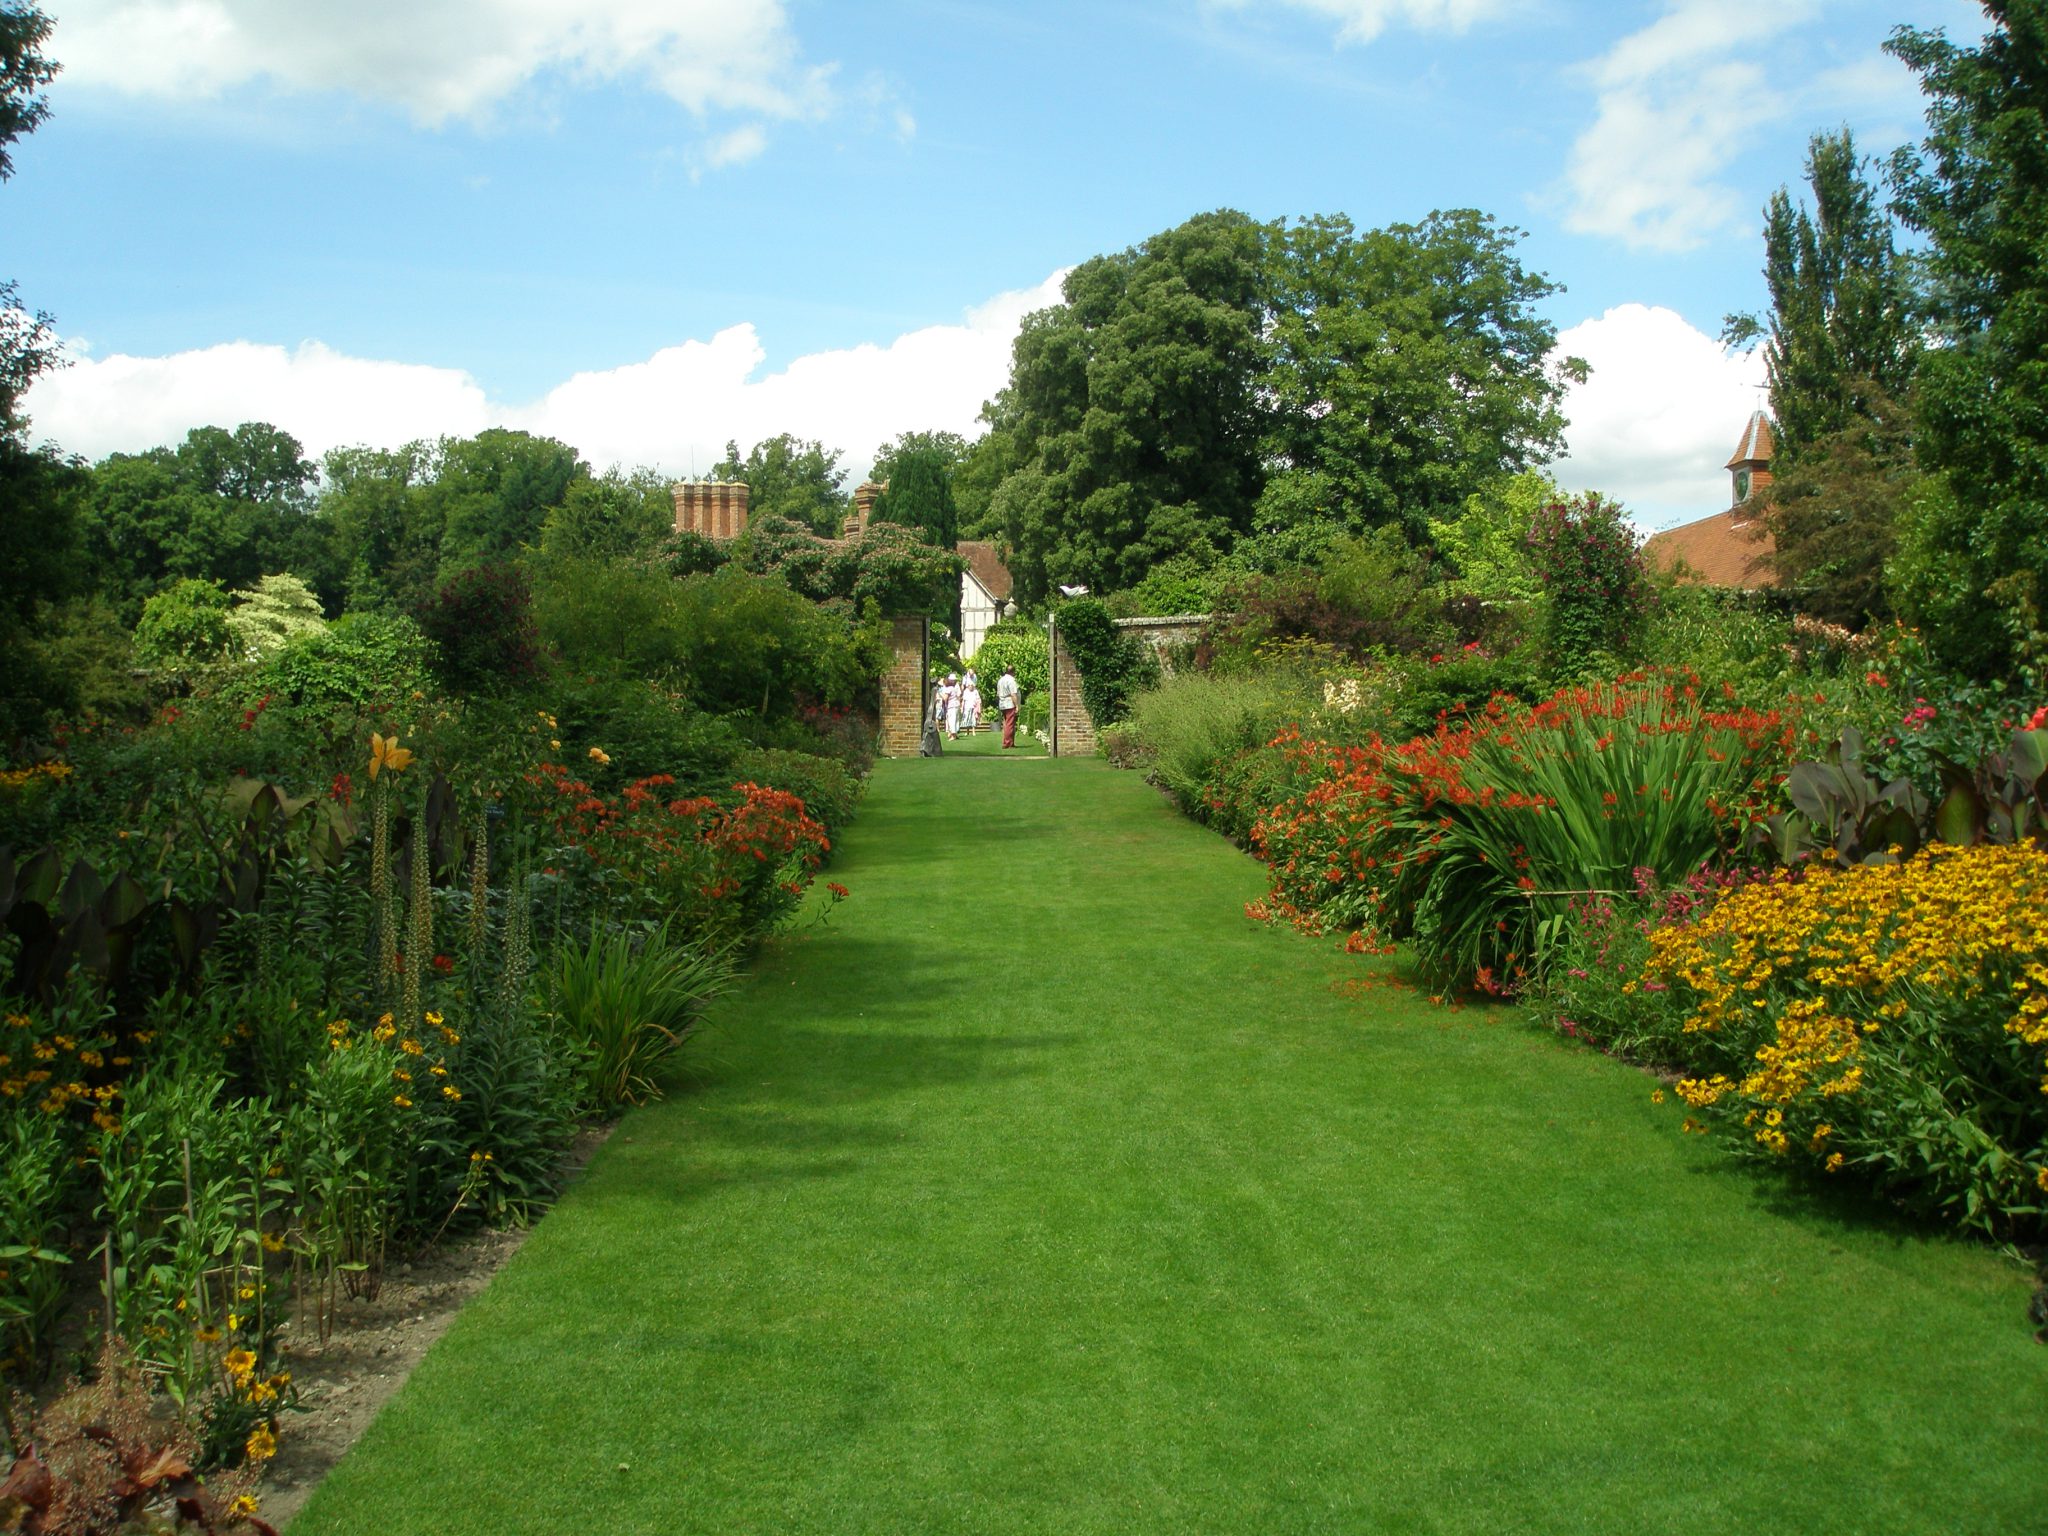 The lower reaches of the Herbaceous Borders and the Hot Gardens